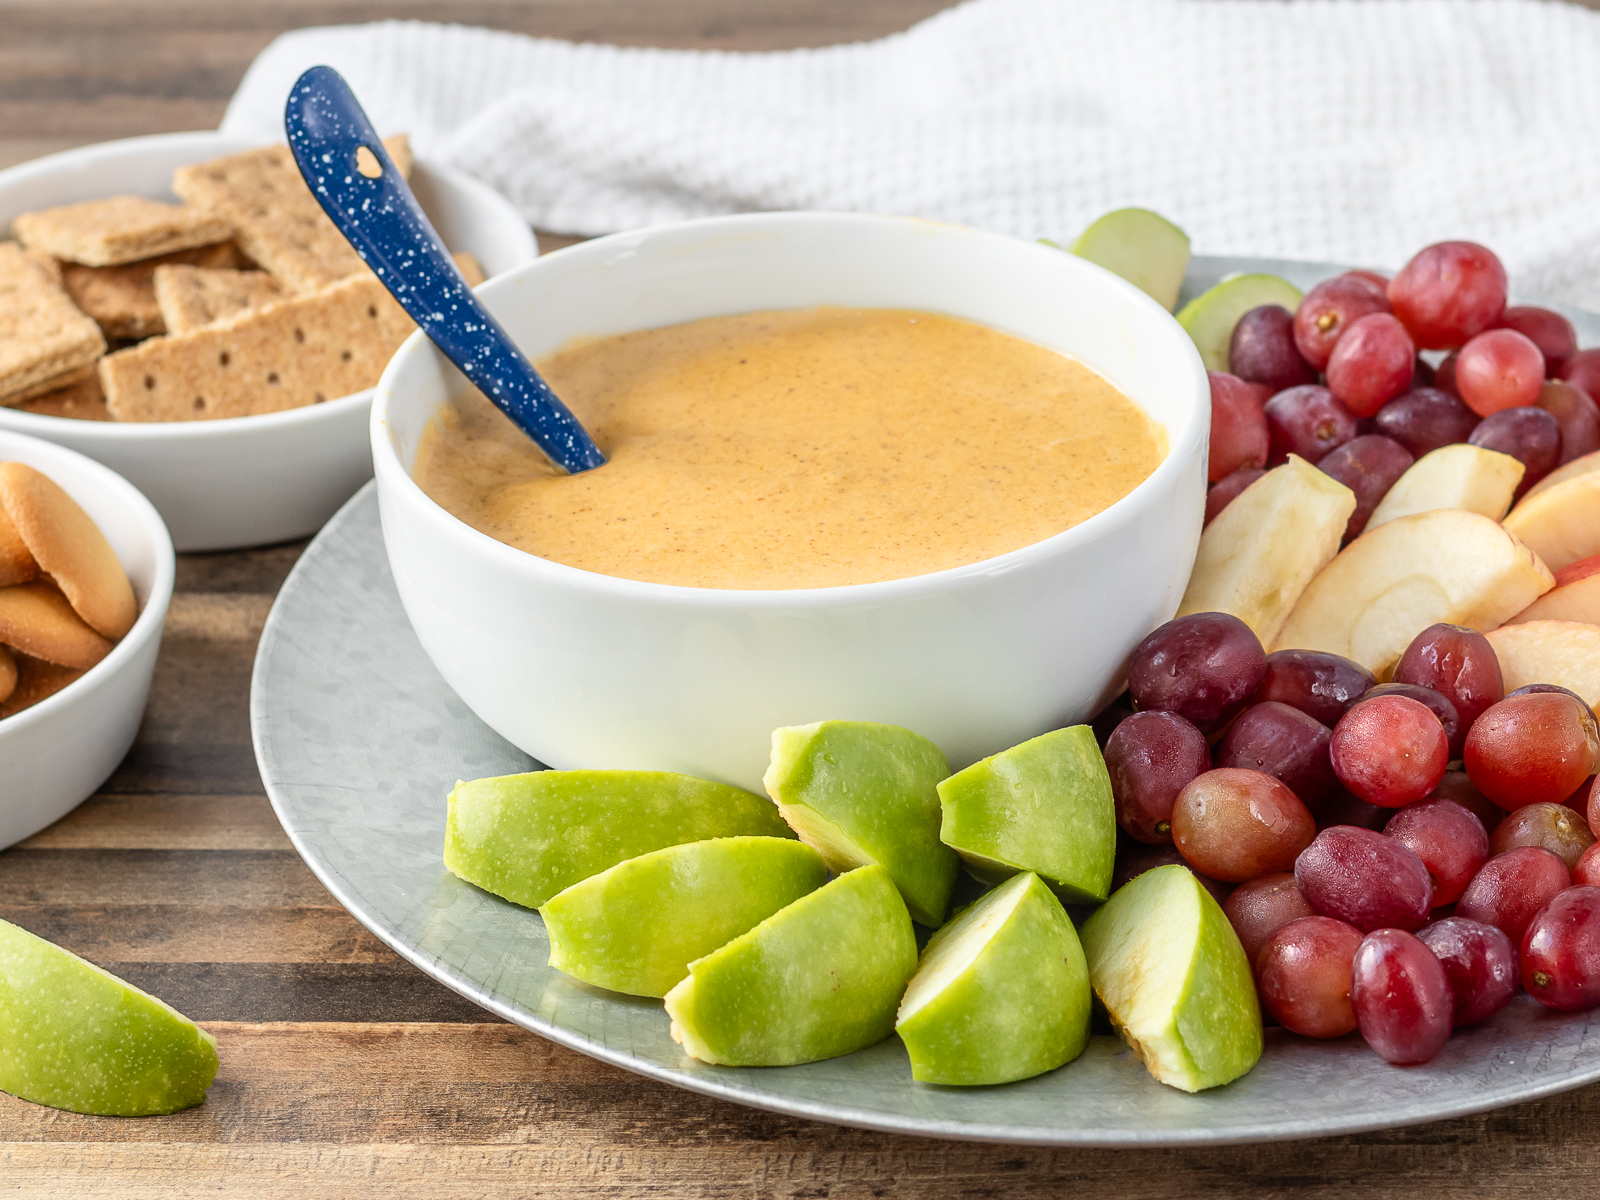 Big bowl of Pumpkin and Maple Fruit Dip with fruits, cookies, and crackers for dipping.